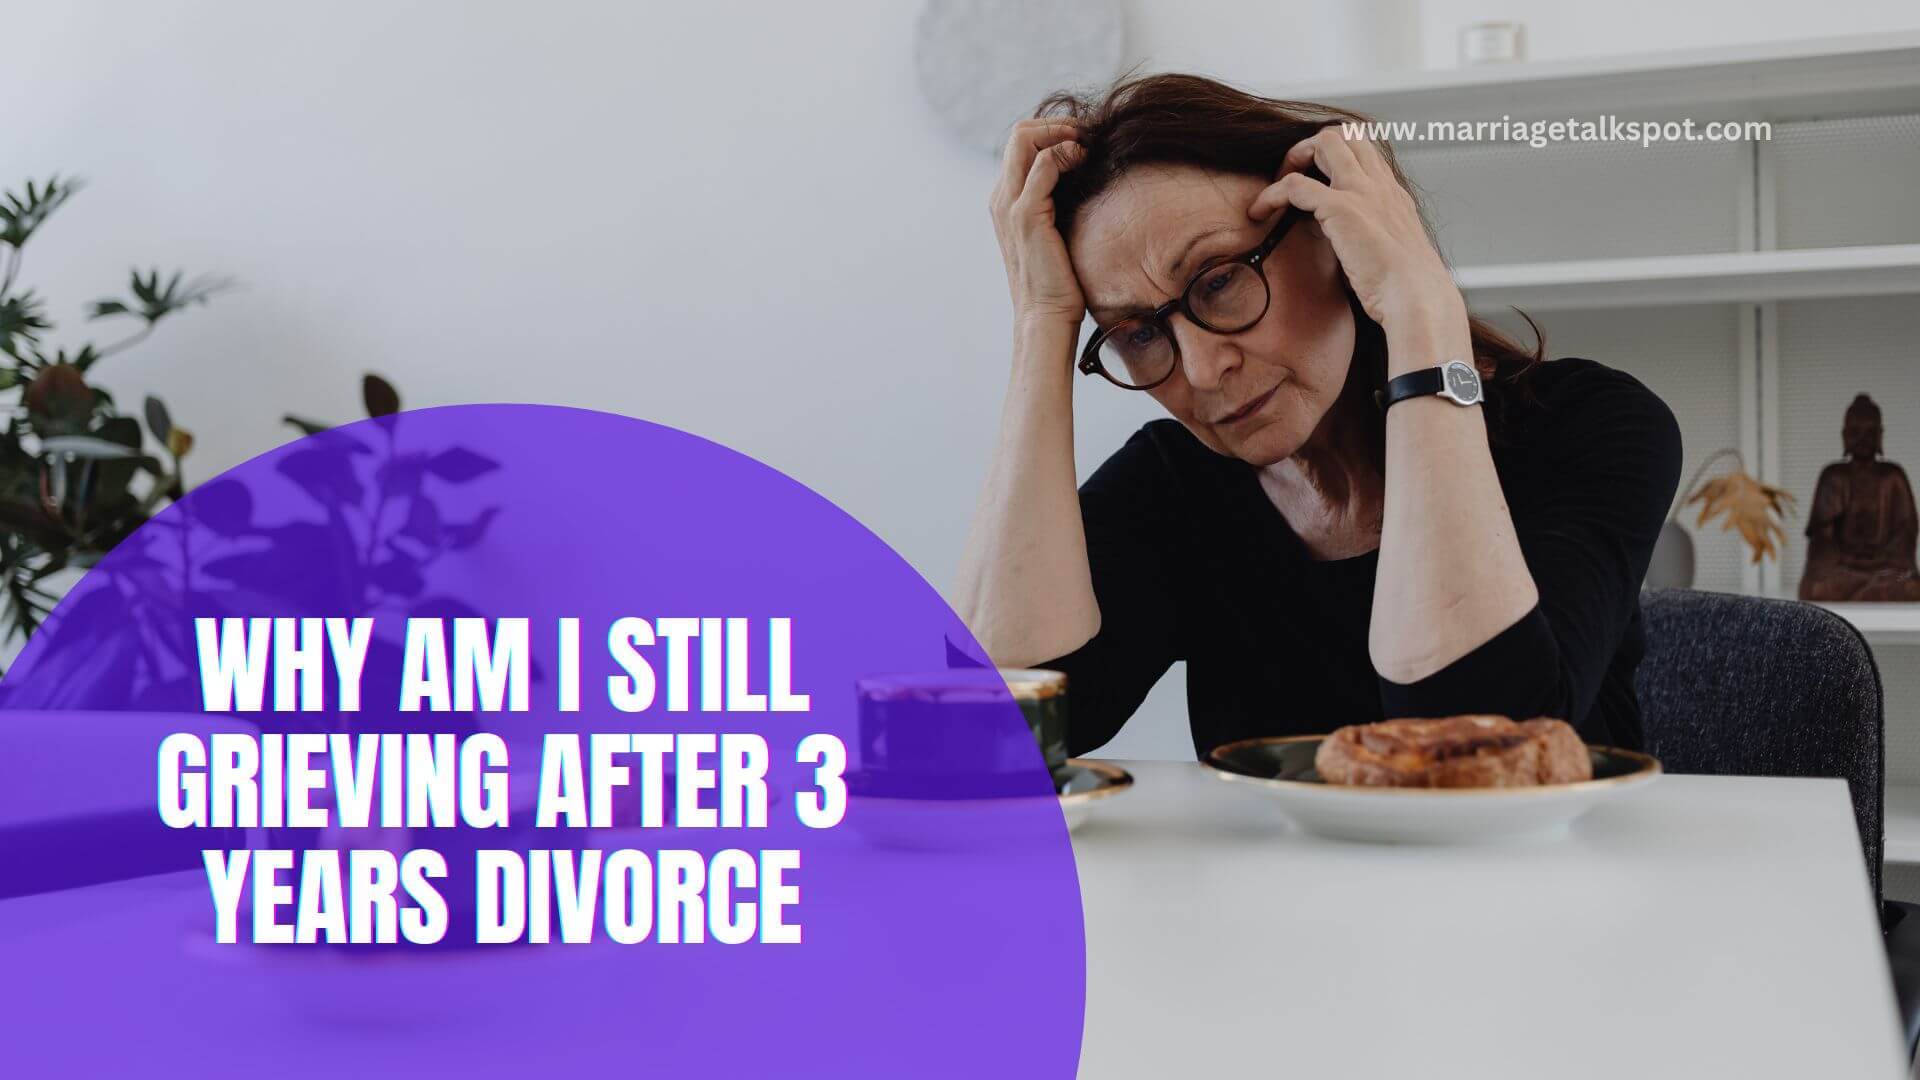 WHY AM I STILL GRIEVING AFTER 3 YEARS DIVORCE